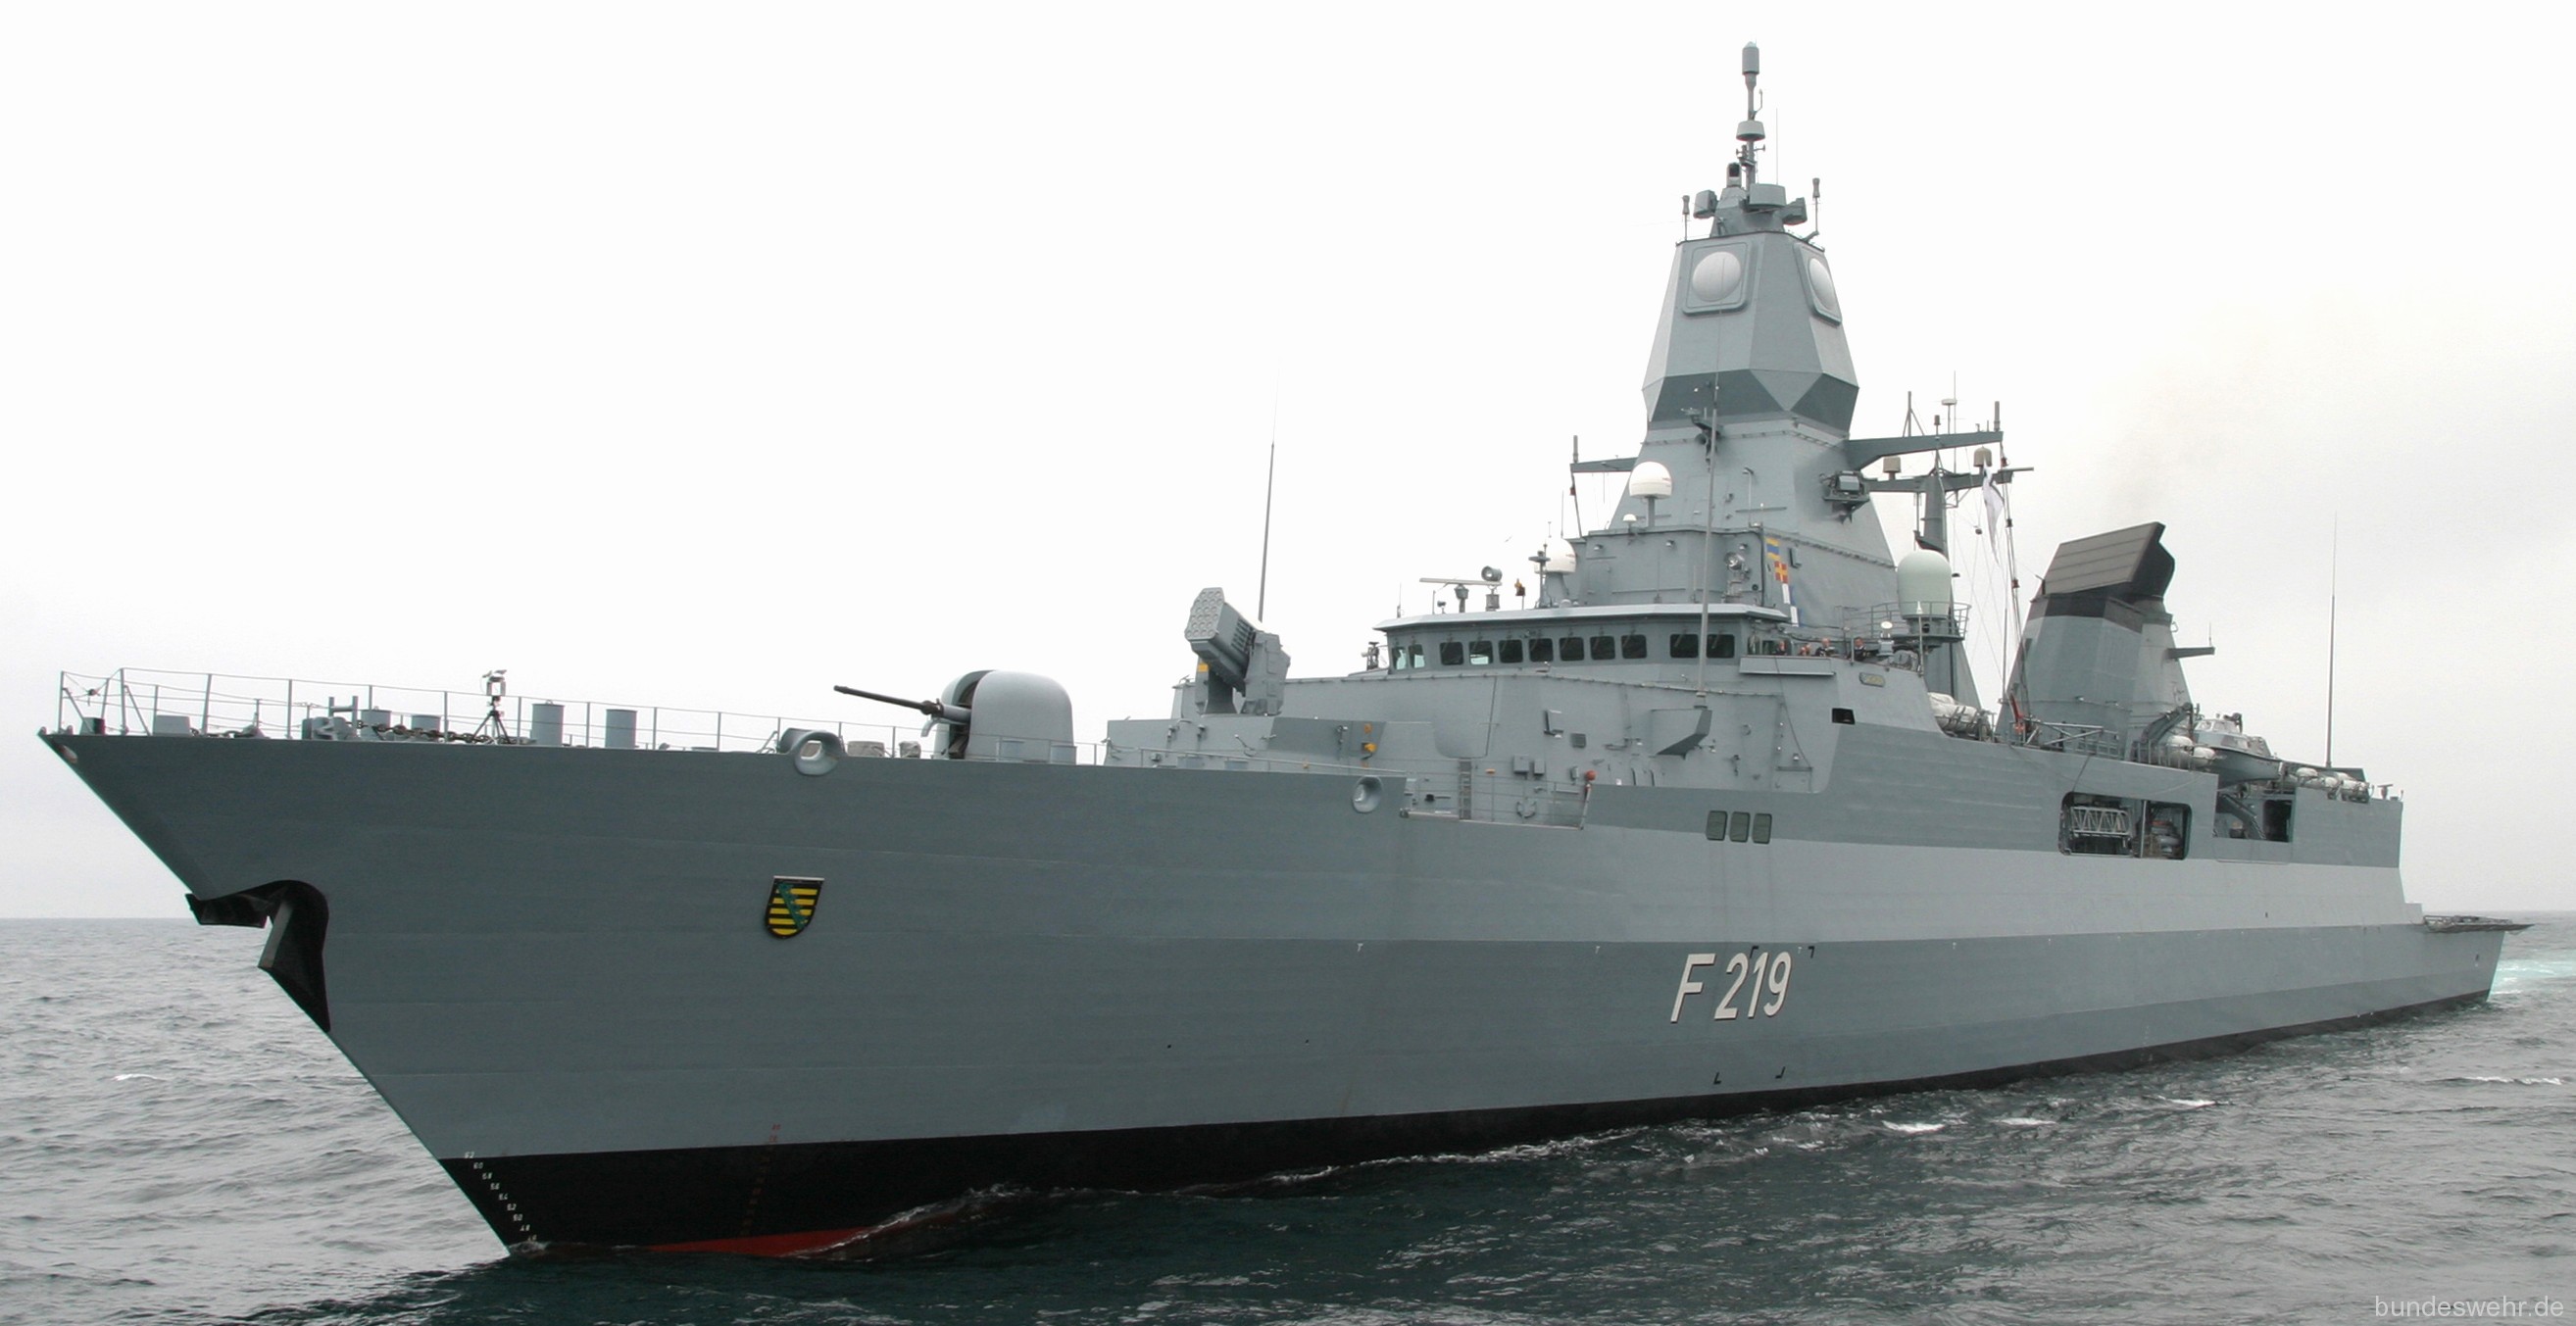 f-219 fgs sachsen type 124 class guided missile frigate ffg german navy 27